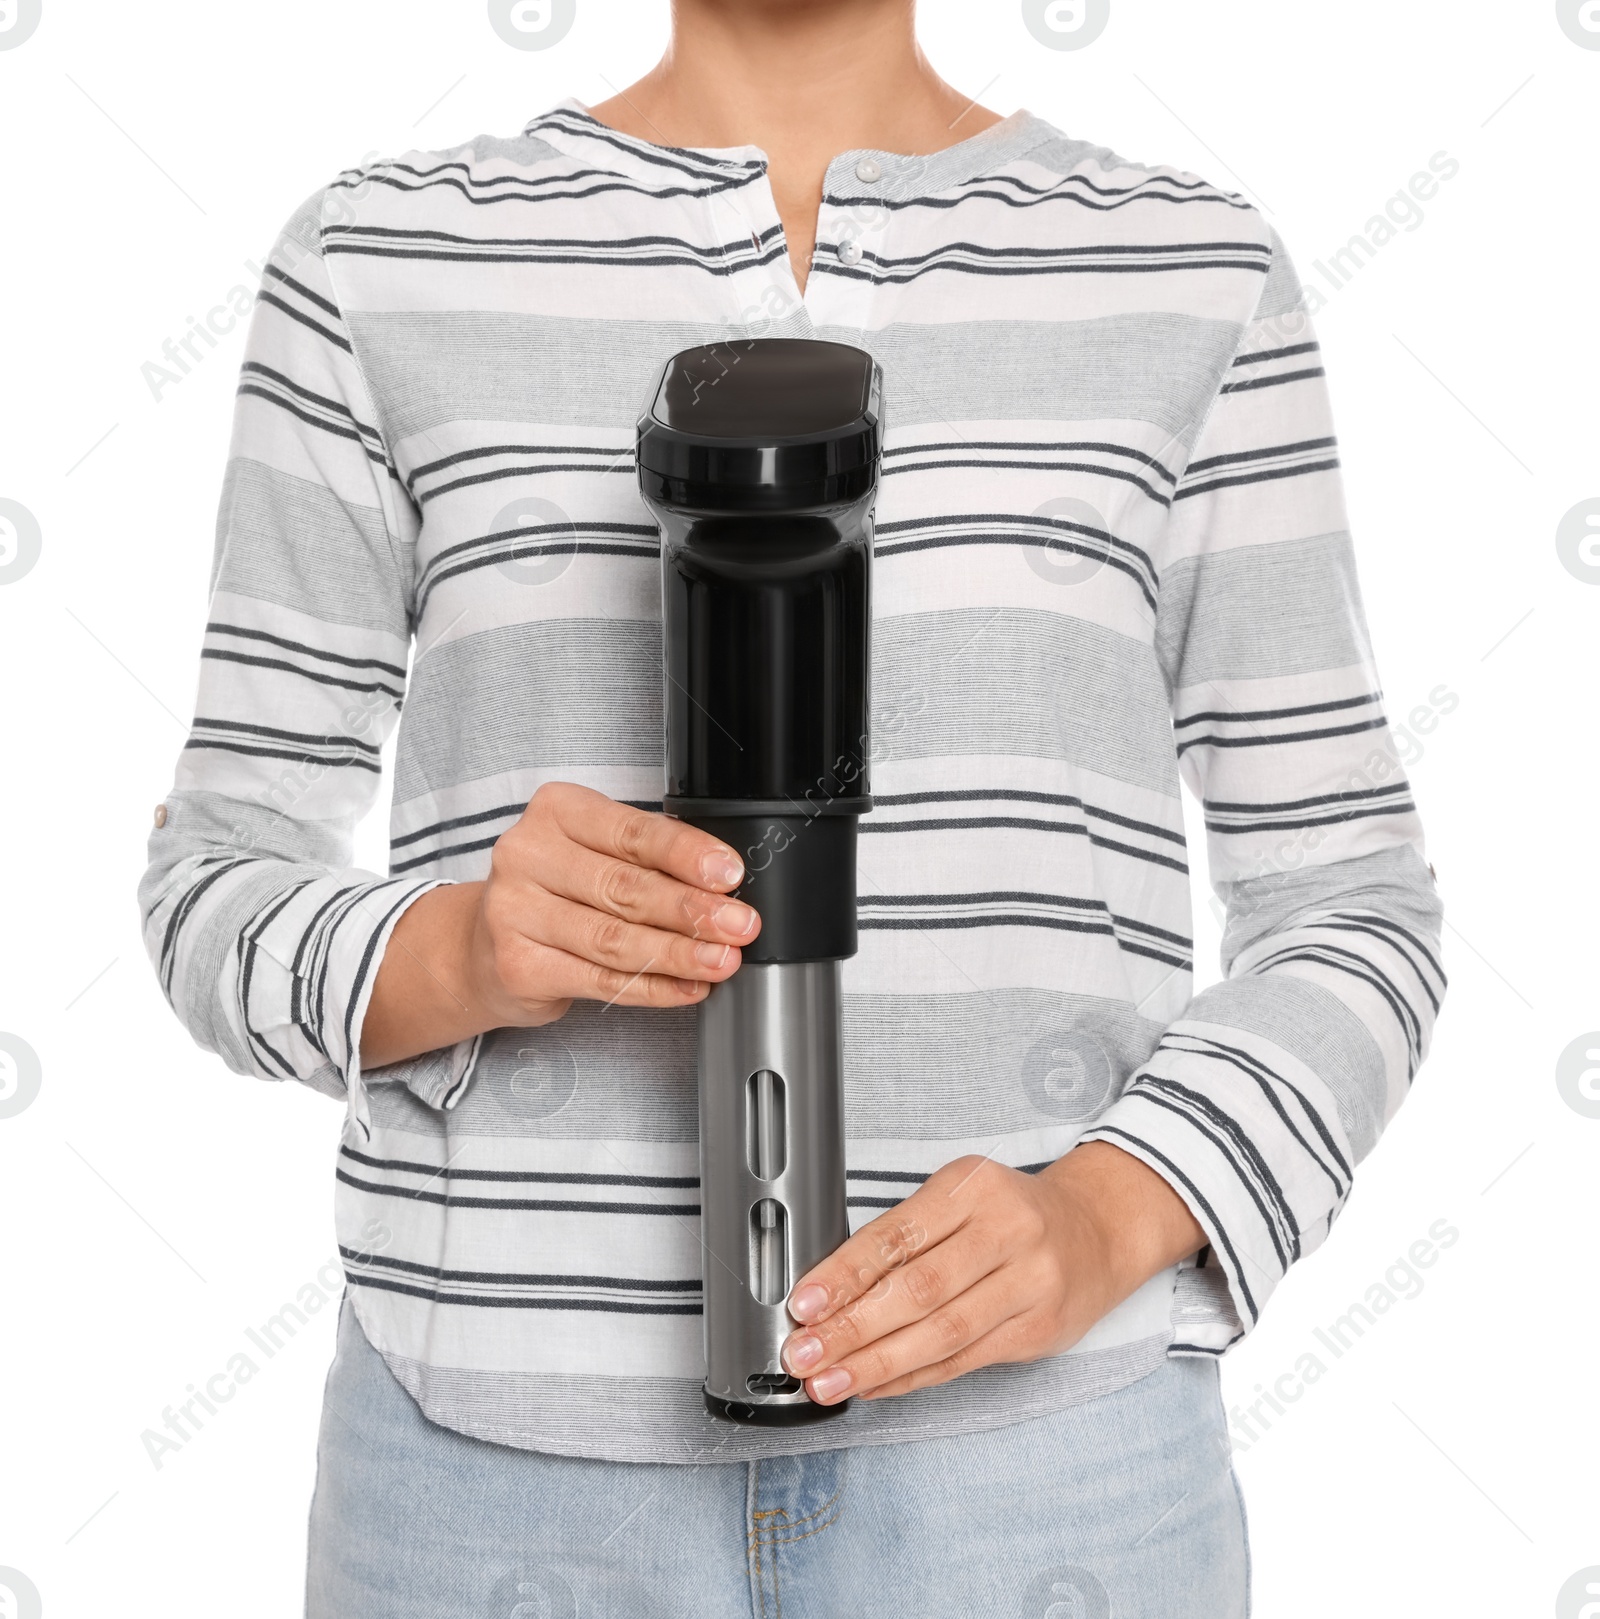 Photo of Woman holding sous vide cooker on white background, closeup